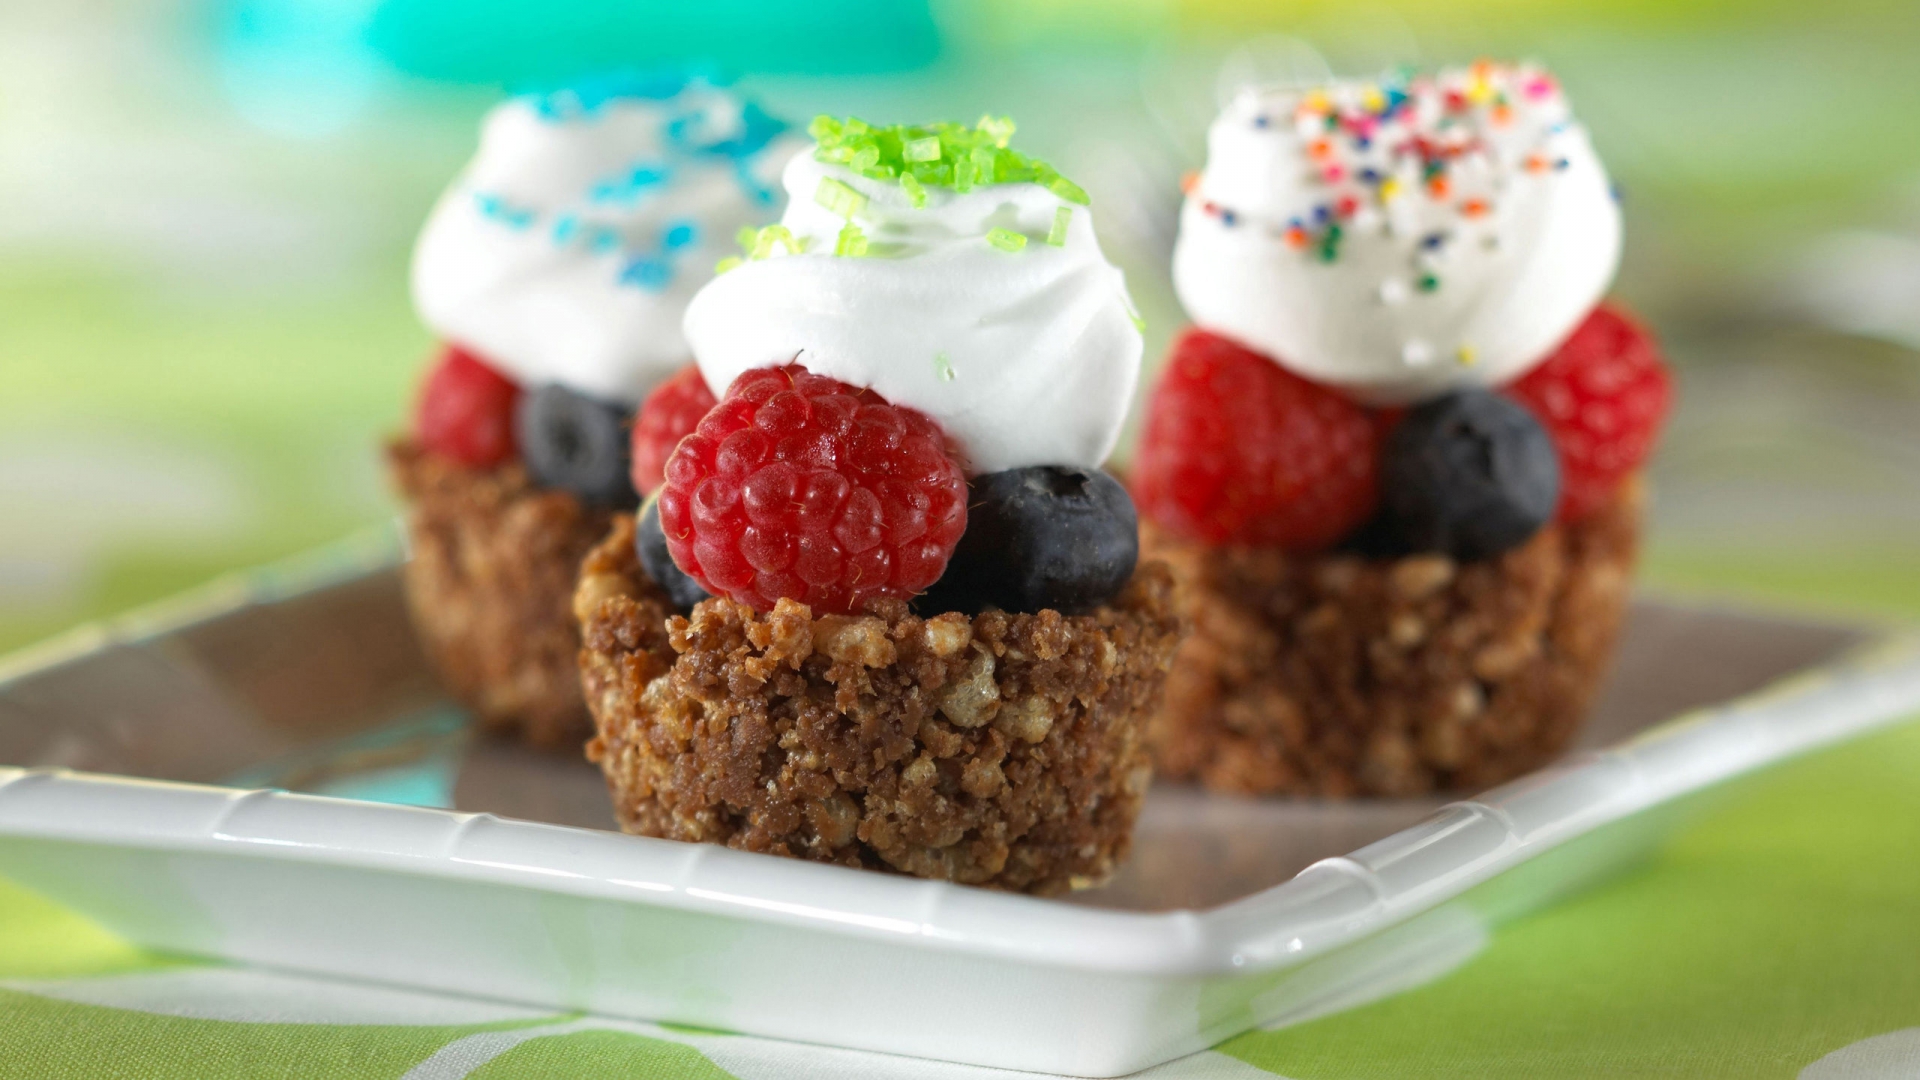 Cereal and Fruits Cakes for 1920 x 1080 HDTV 1080p resolution